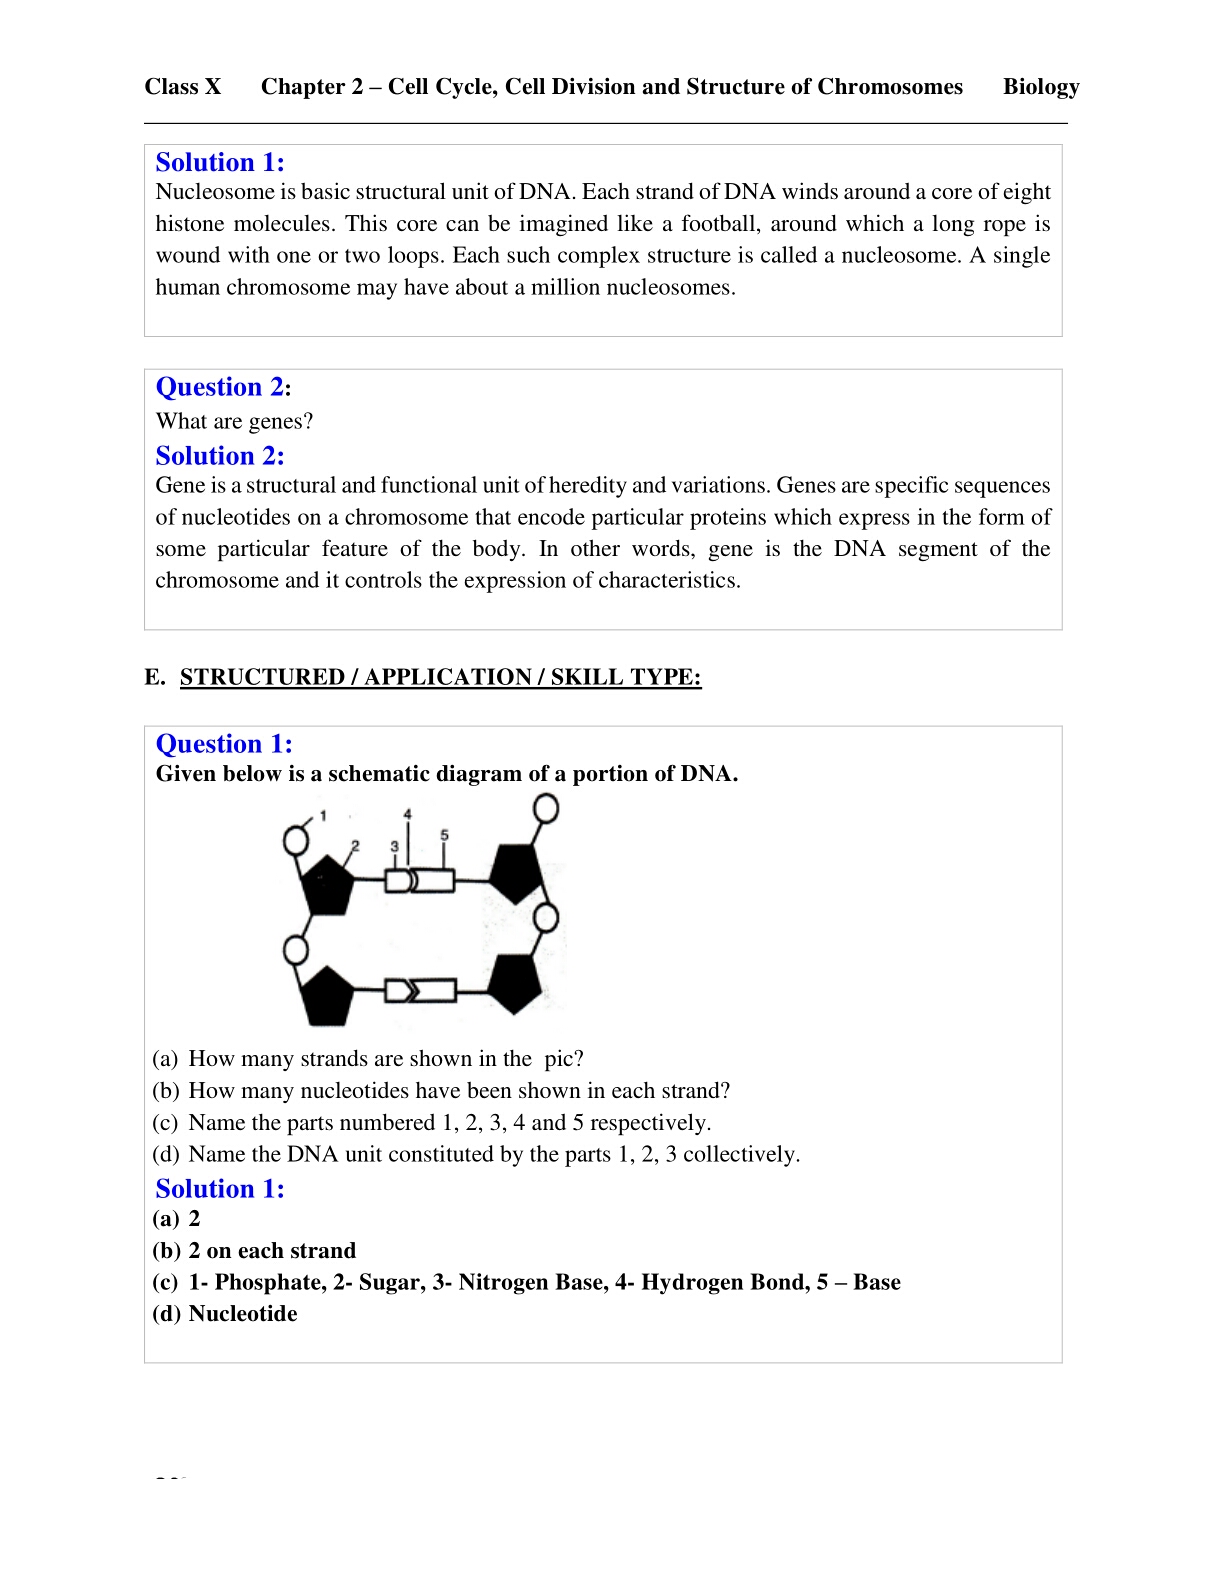 ICSE Concise Biology Class 10 Chapter 2 - ICSE HUB OFFICIAL